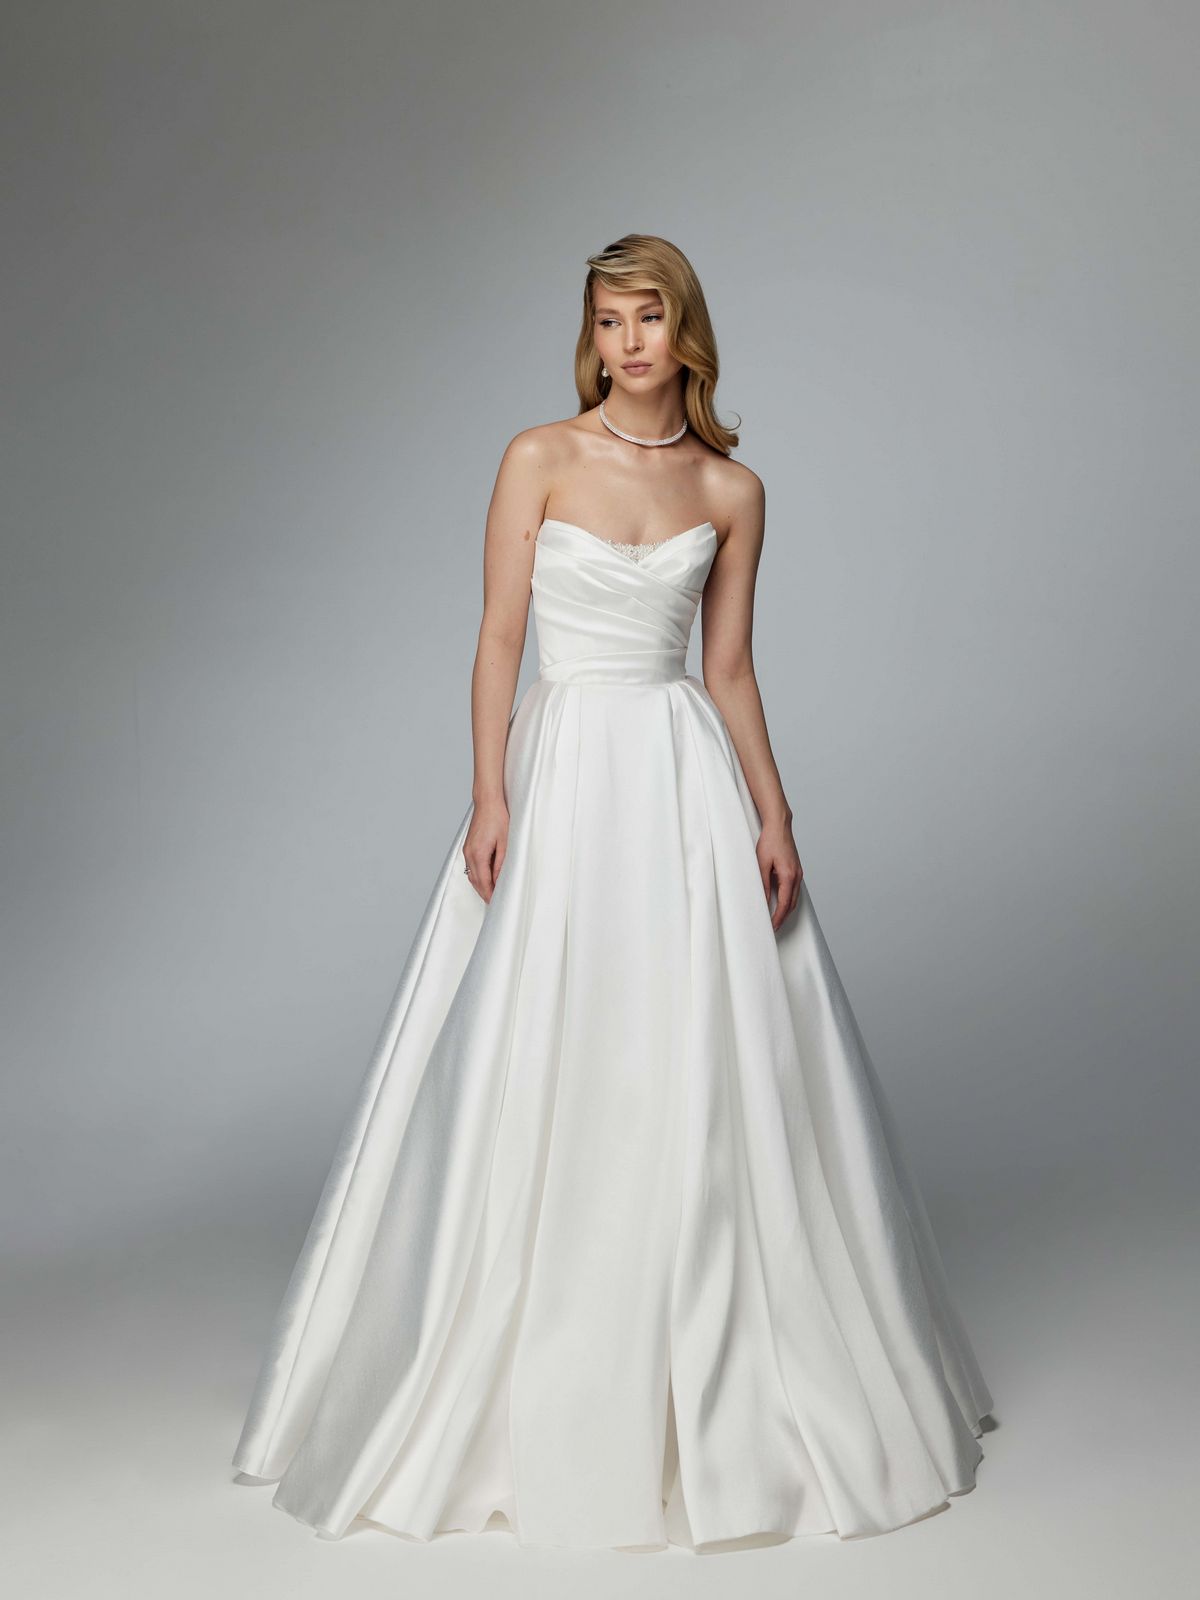 Simple elegant wedding dress with a long train and removable sleeves by ange etoiles. 3